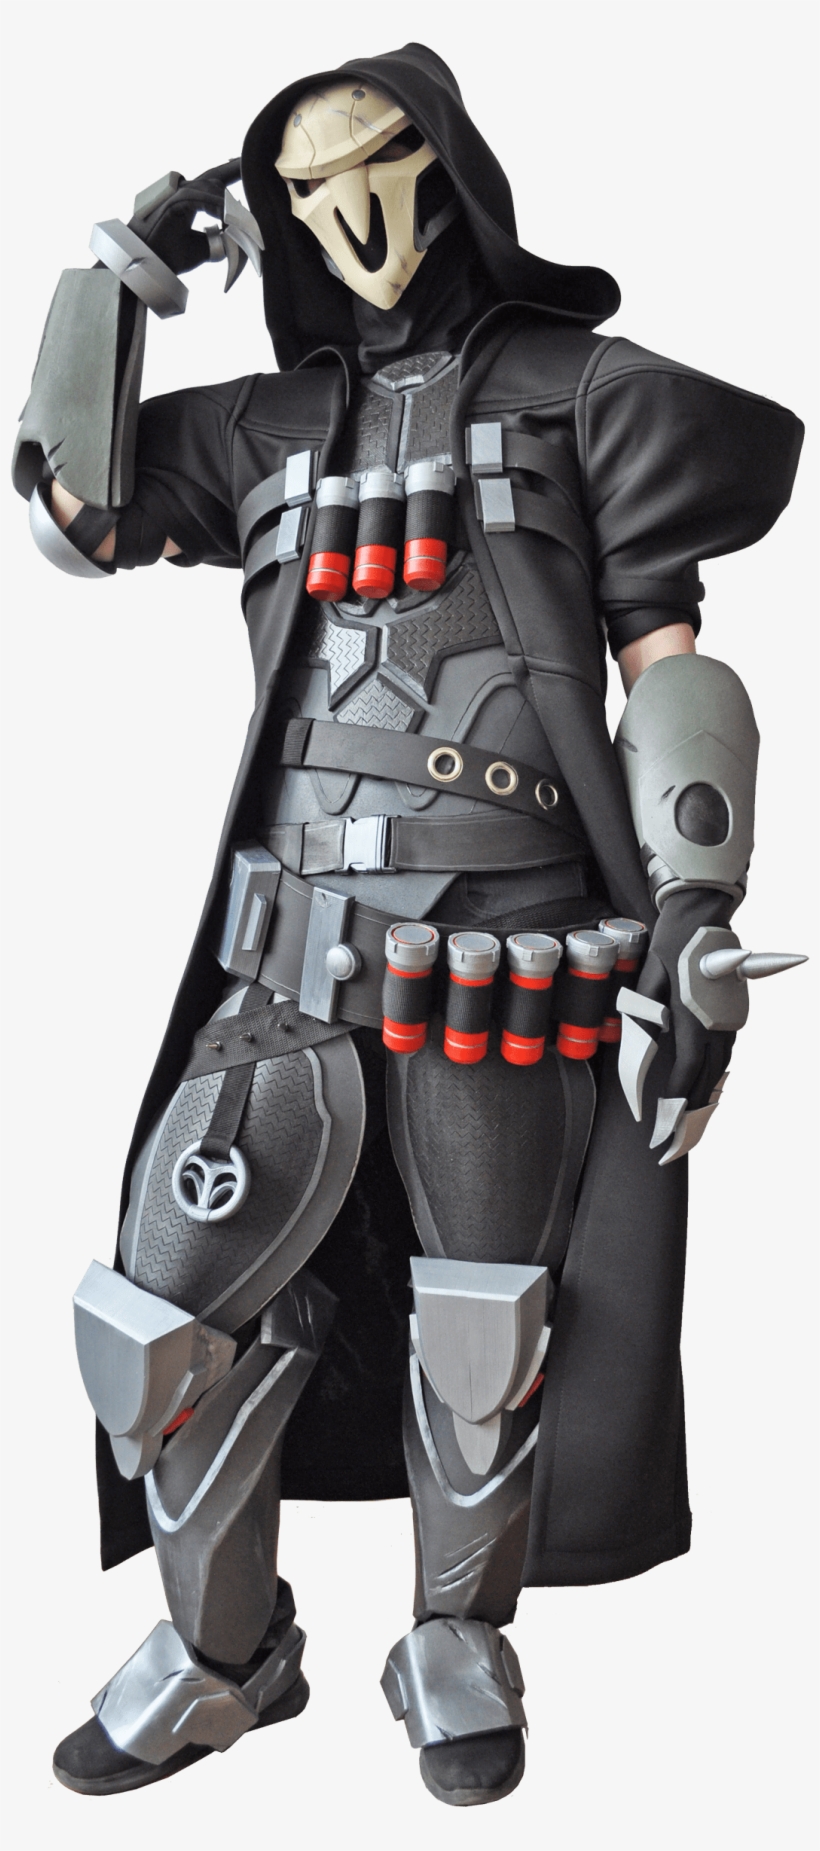 Overwatch Cosplay For Sale - Overwatch Costumes For Sale, transparent png #2006234